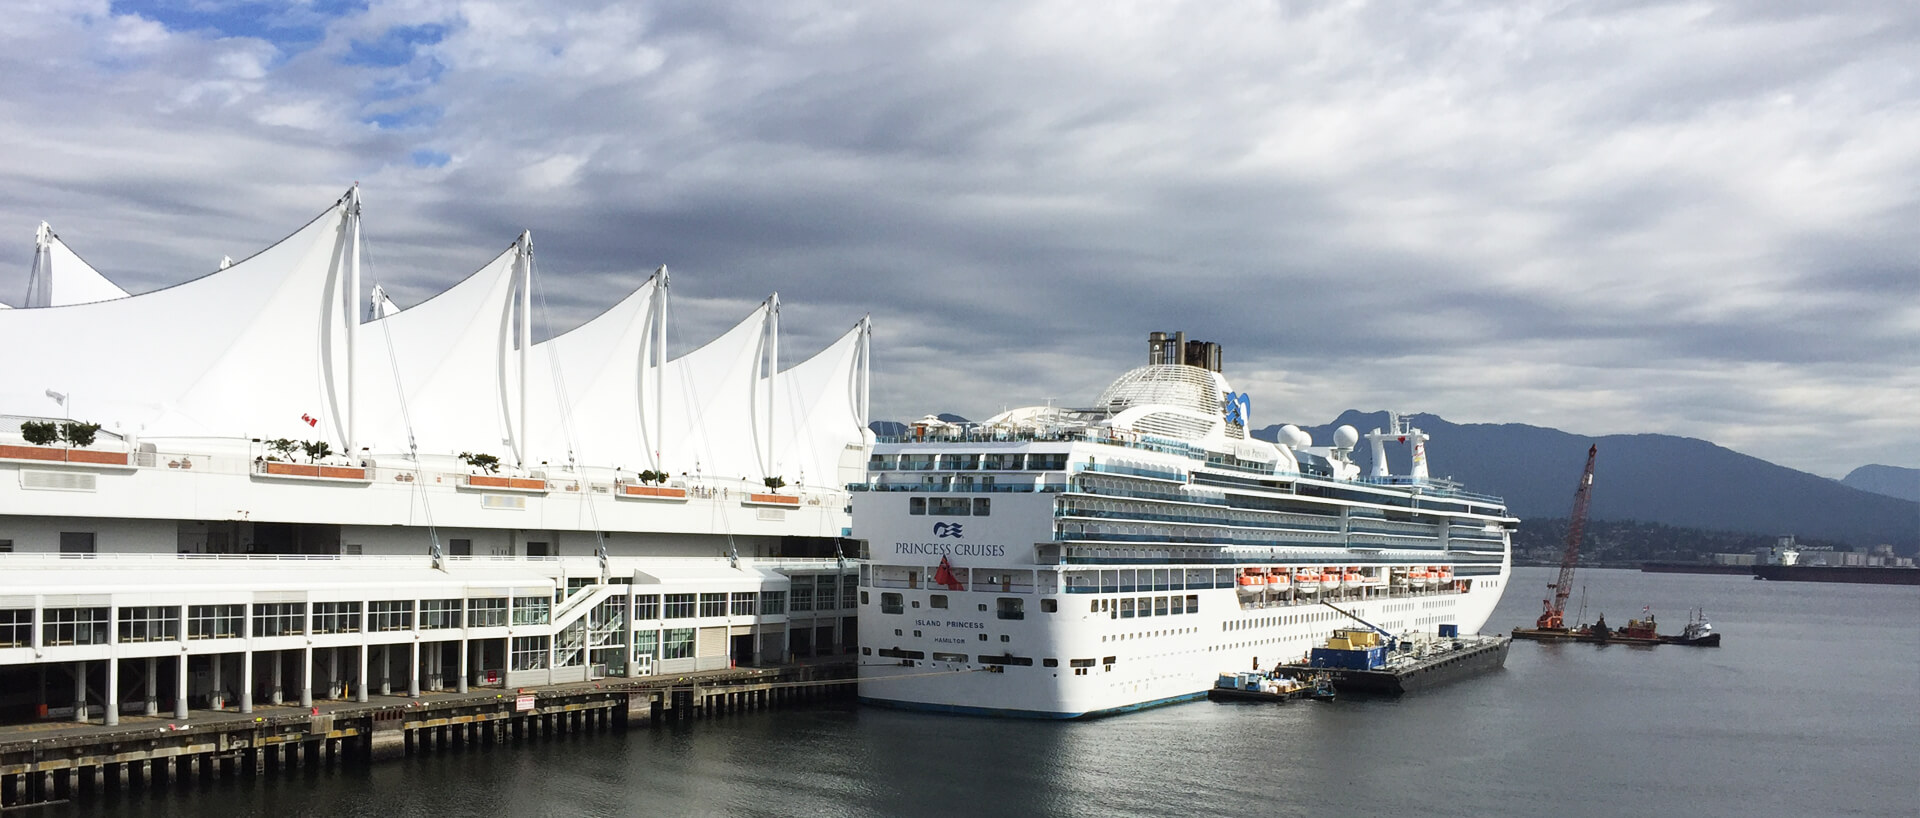 A cruise ship docked at Canada Place at Vancouver's waterfront.